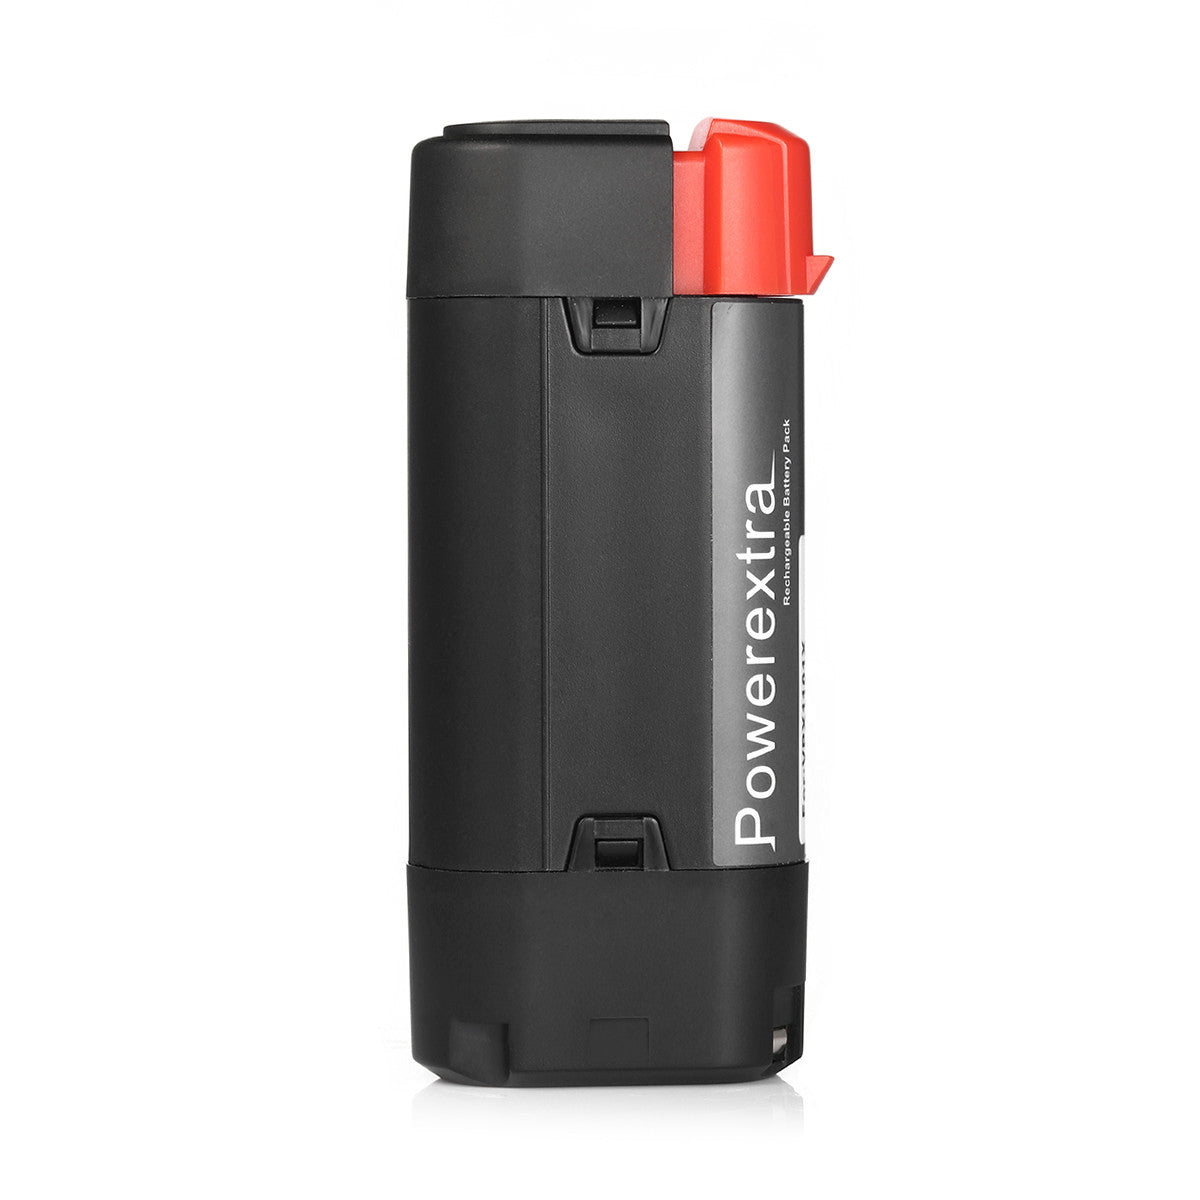 3.6V 3000mAh Ni-MH Replacement Battery for Black & Decker – Powerextra